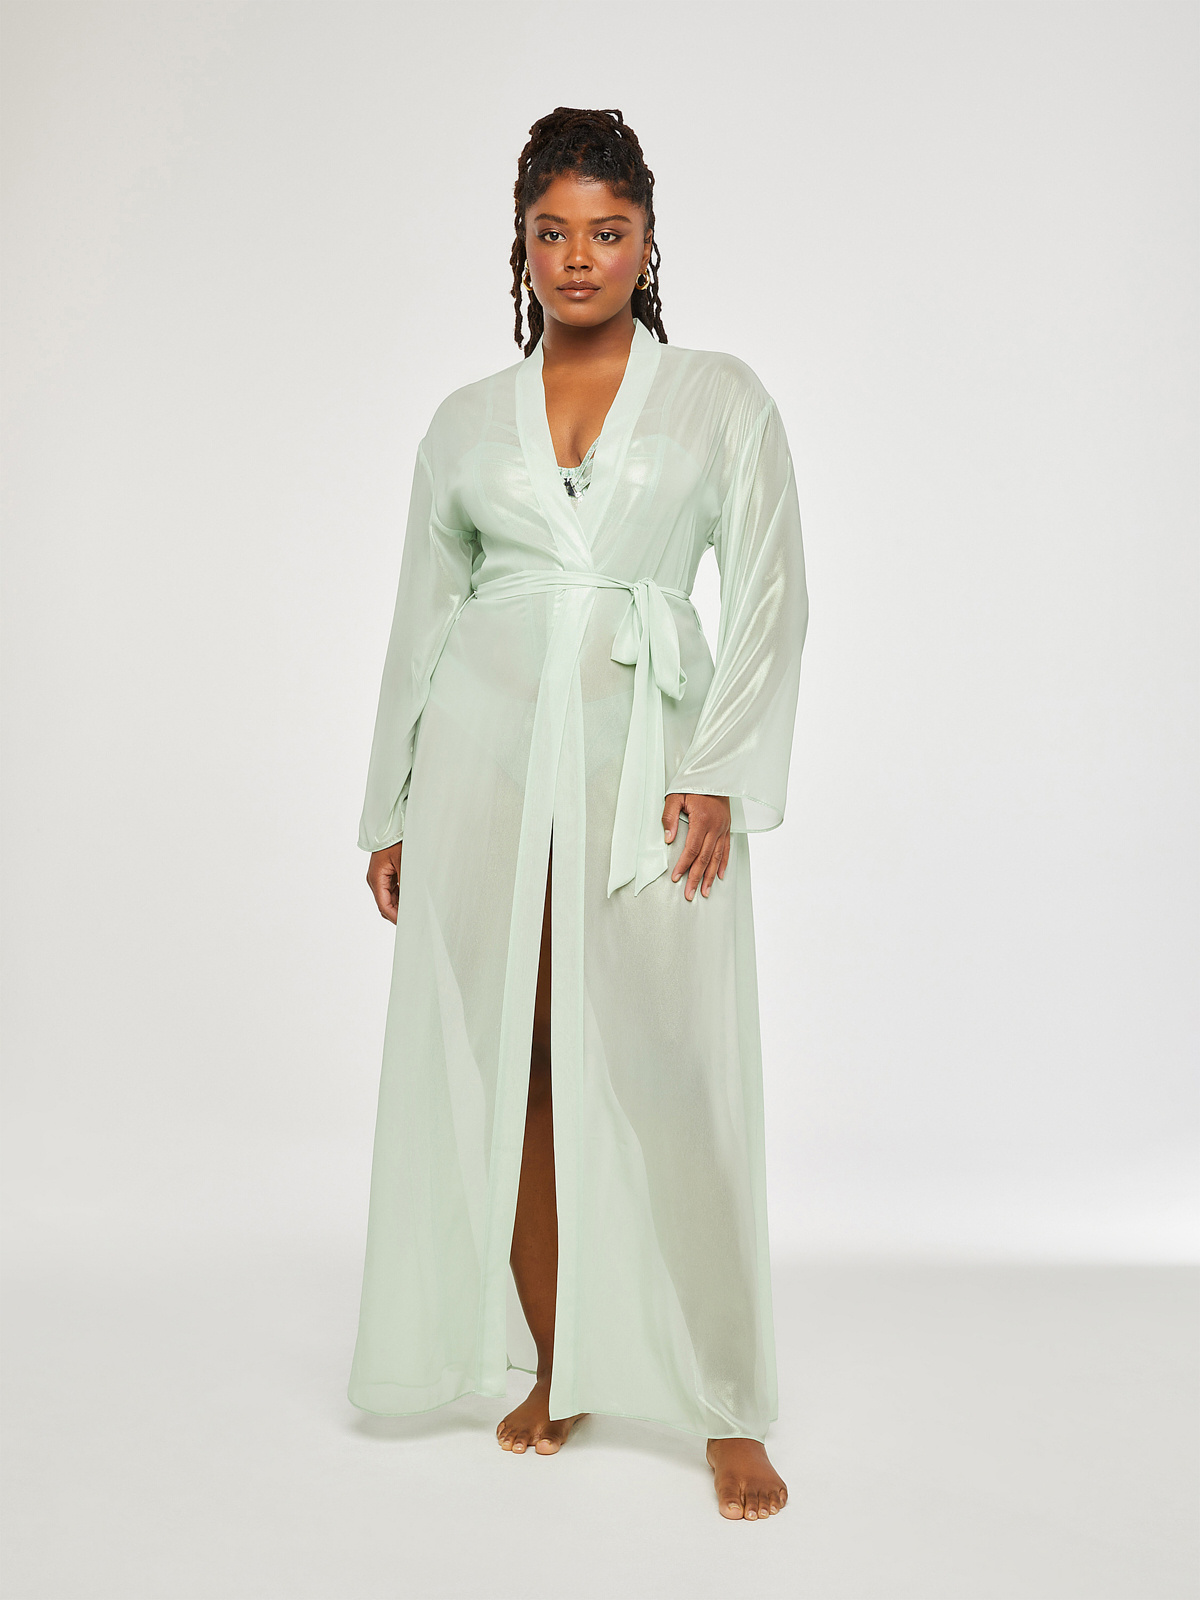 Women's Dressing Gowns | Robes | Tu clothing